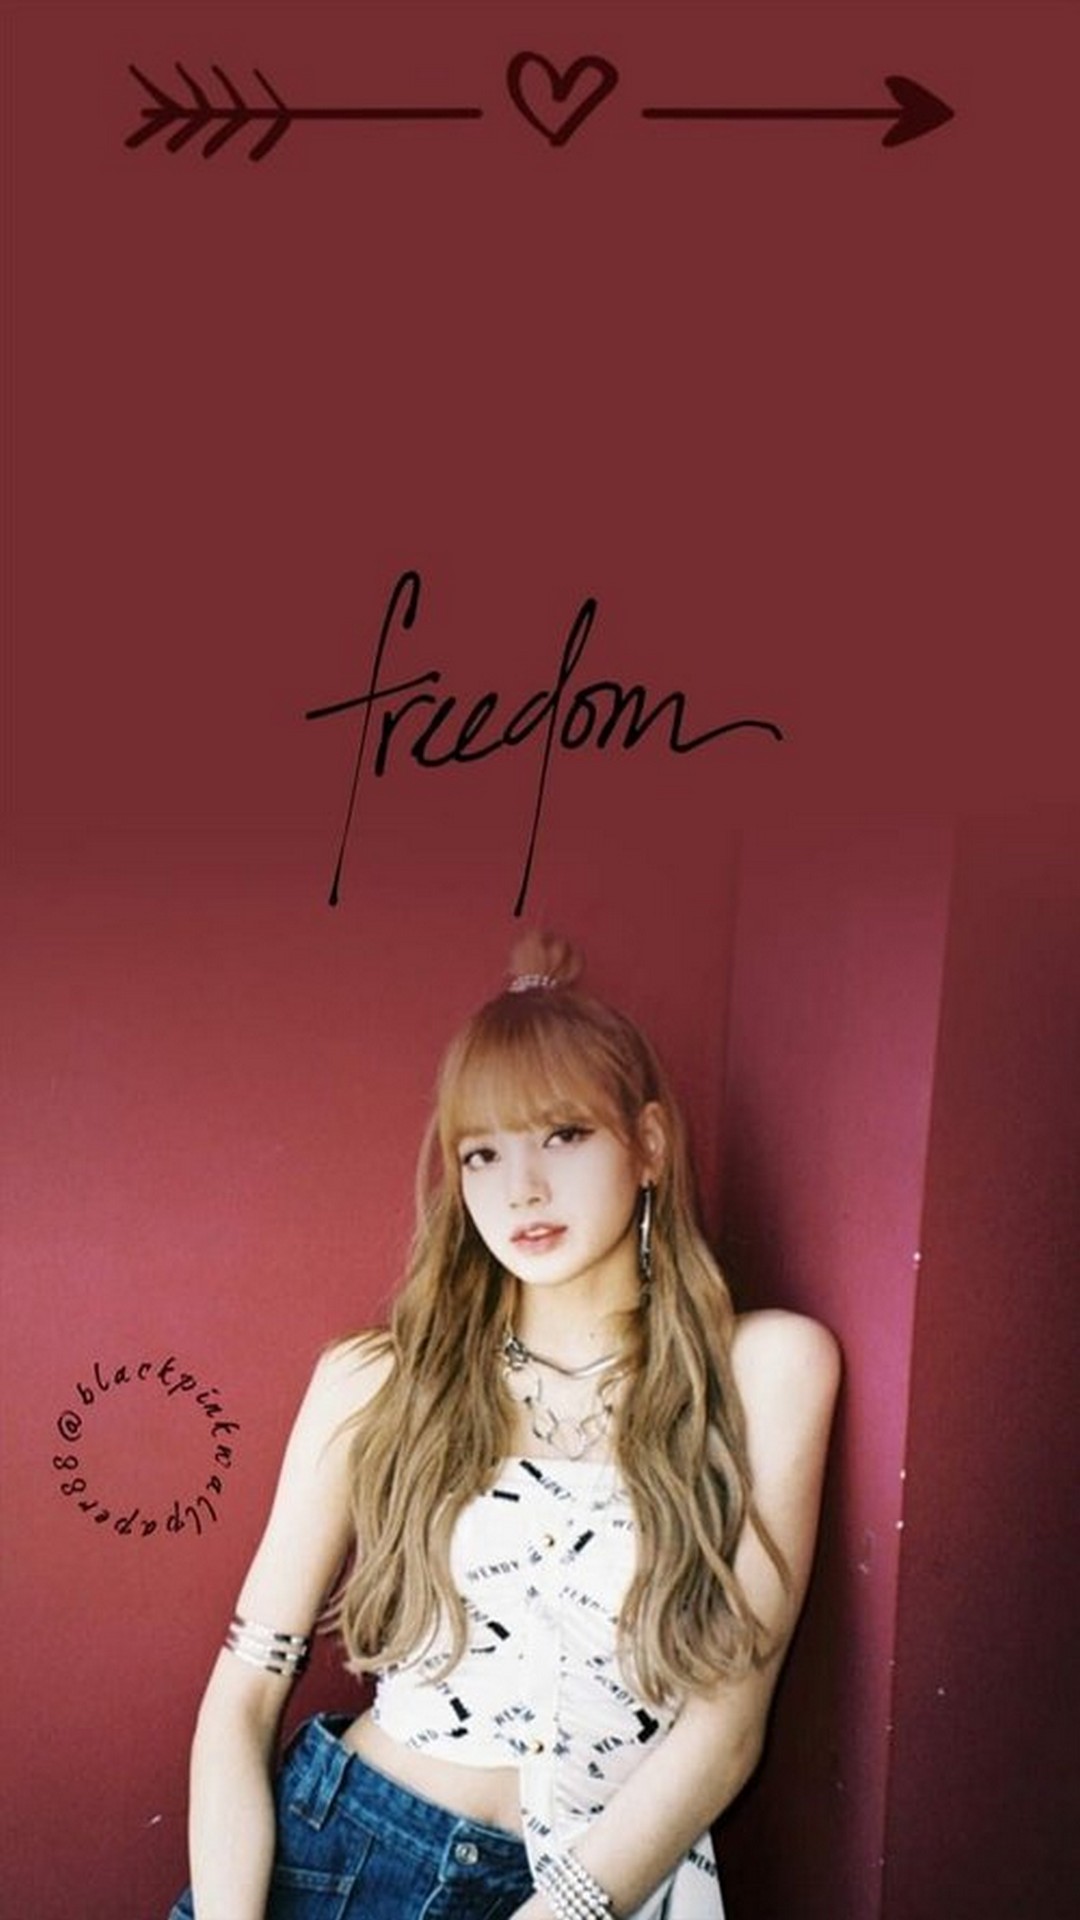 Lisa Blackpink iPhone Wallpaper in HD with high-resolution 1080x1920 pixel. You can set as wallpaper for Apple iPhone X, XS Max, XR, 8, 7, 6, SE, iPad. Enjoy and share your favorite HD wallpapers and background images